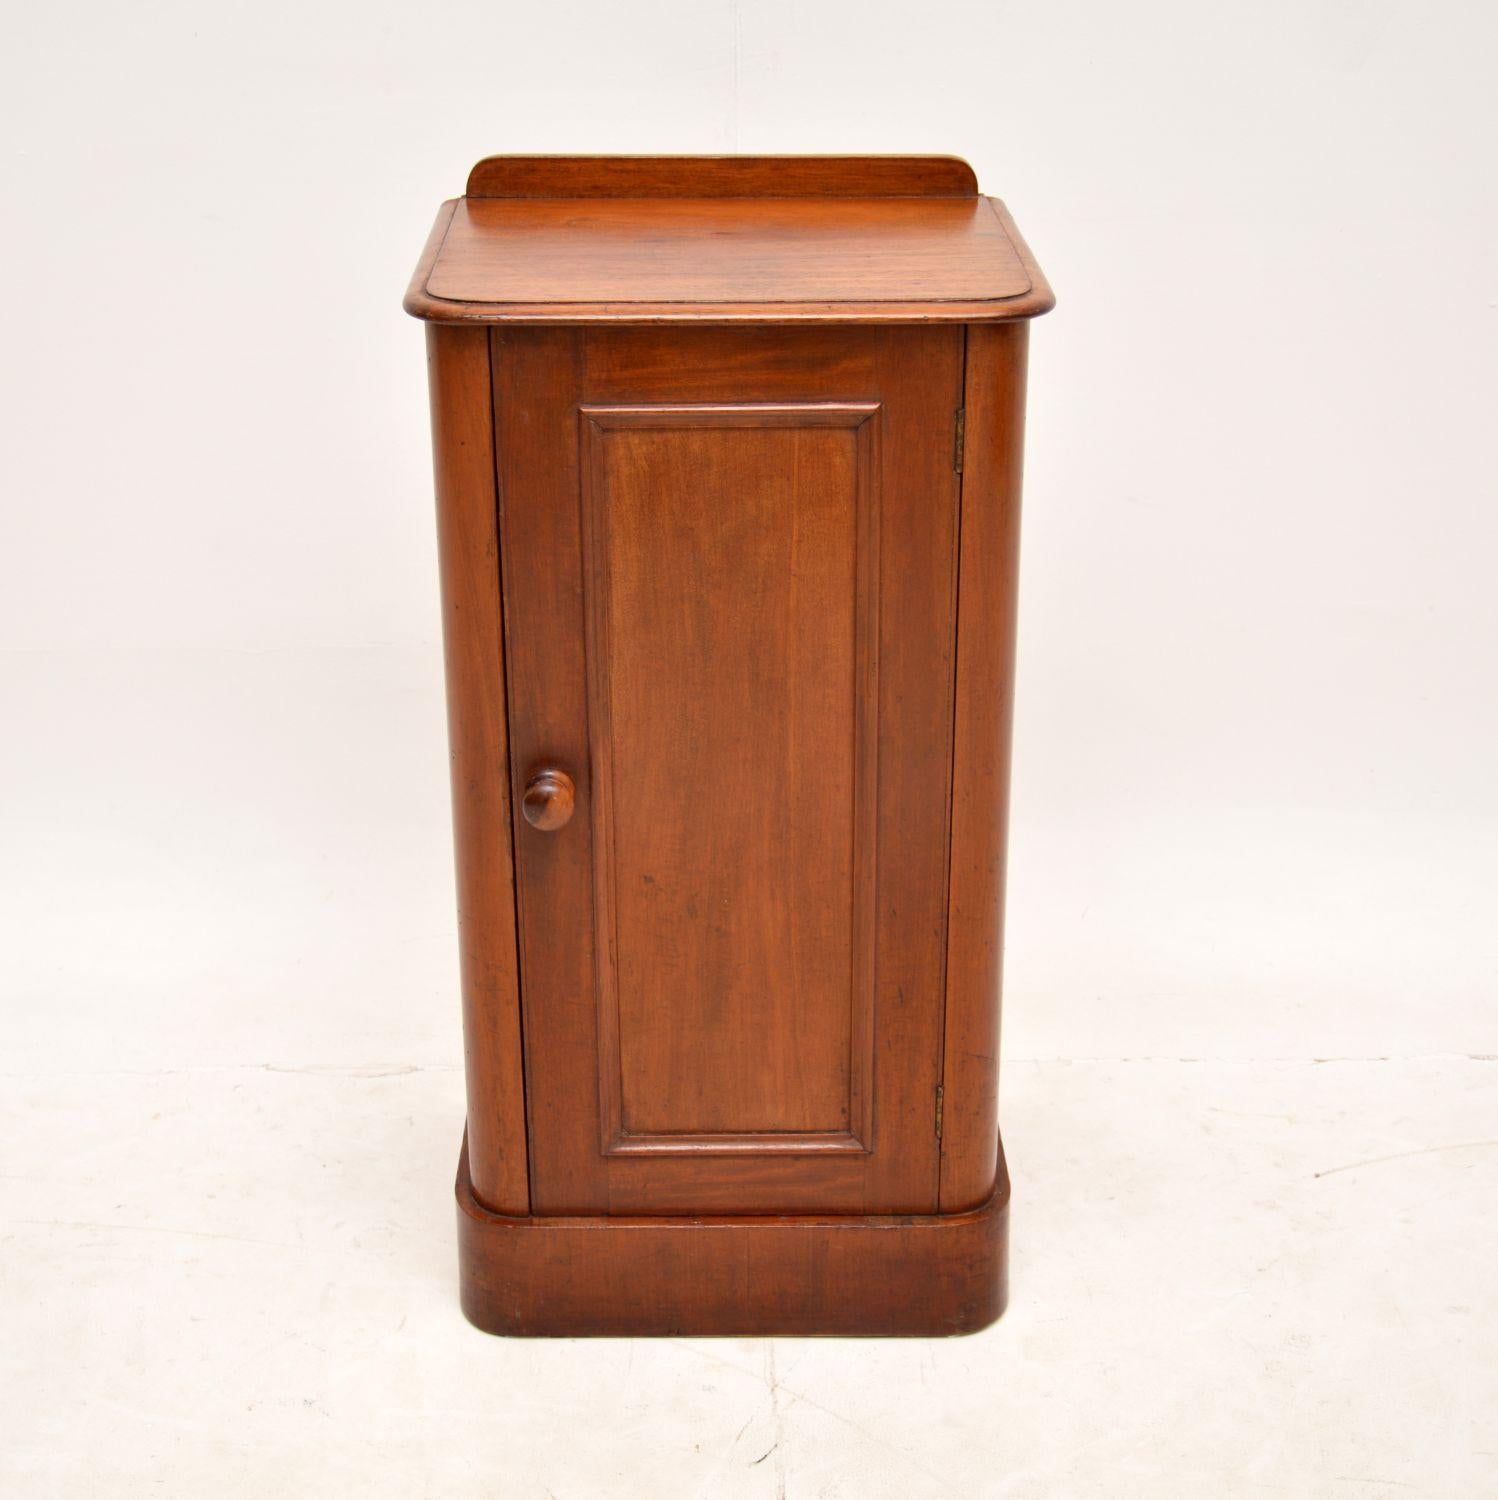 A lovely original antique Victorian bedside cabinet. This was made in England, it dates from around 1860-1880.

It is very well made and useful item, the wood has acquired a beautiful colour tone and patina. This sits on a plinth base, has a